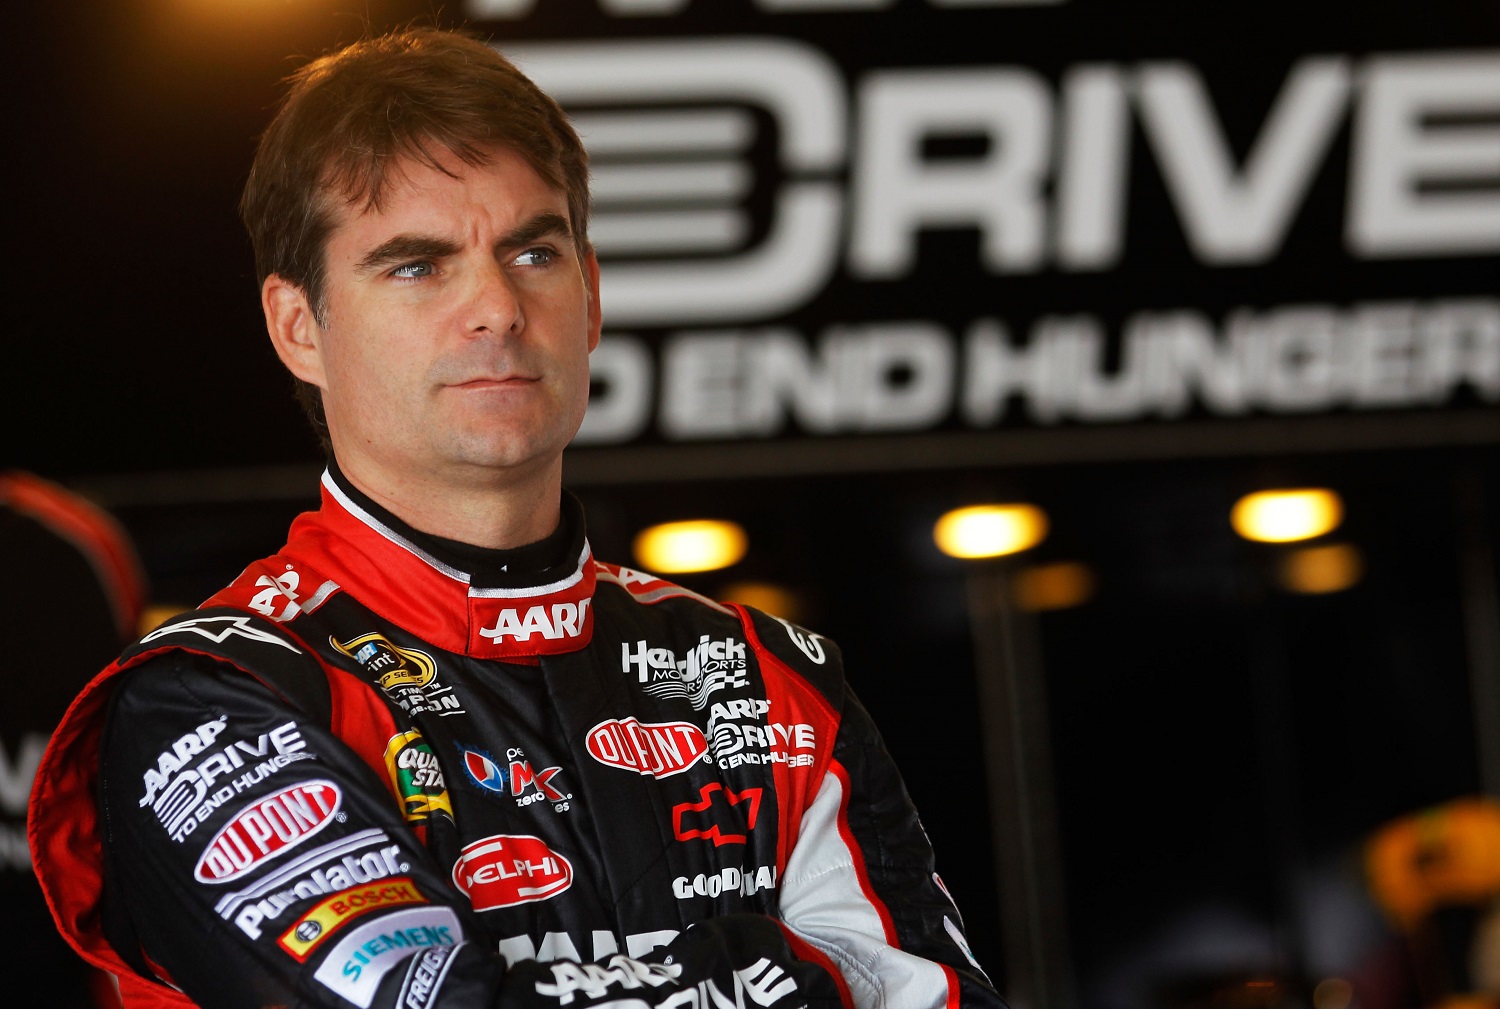 Where Did Jeff Gordon Capture His Most NASCAR Cup Series Wins?